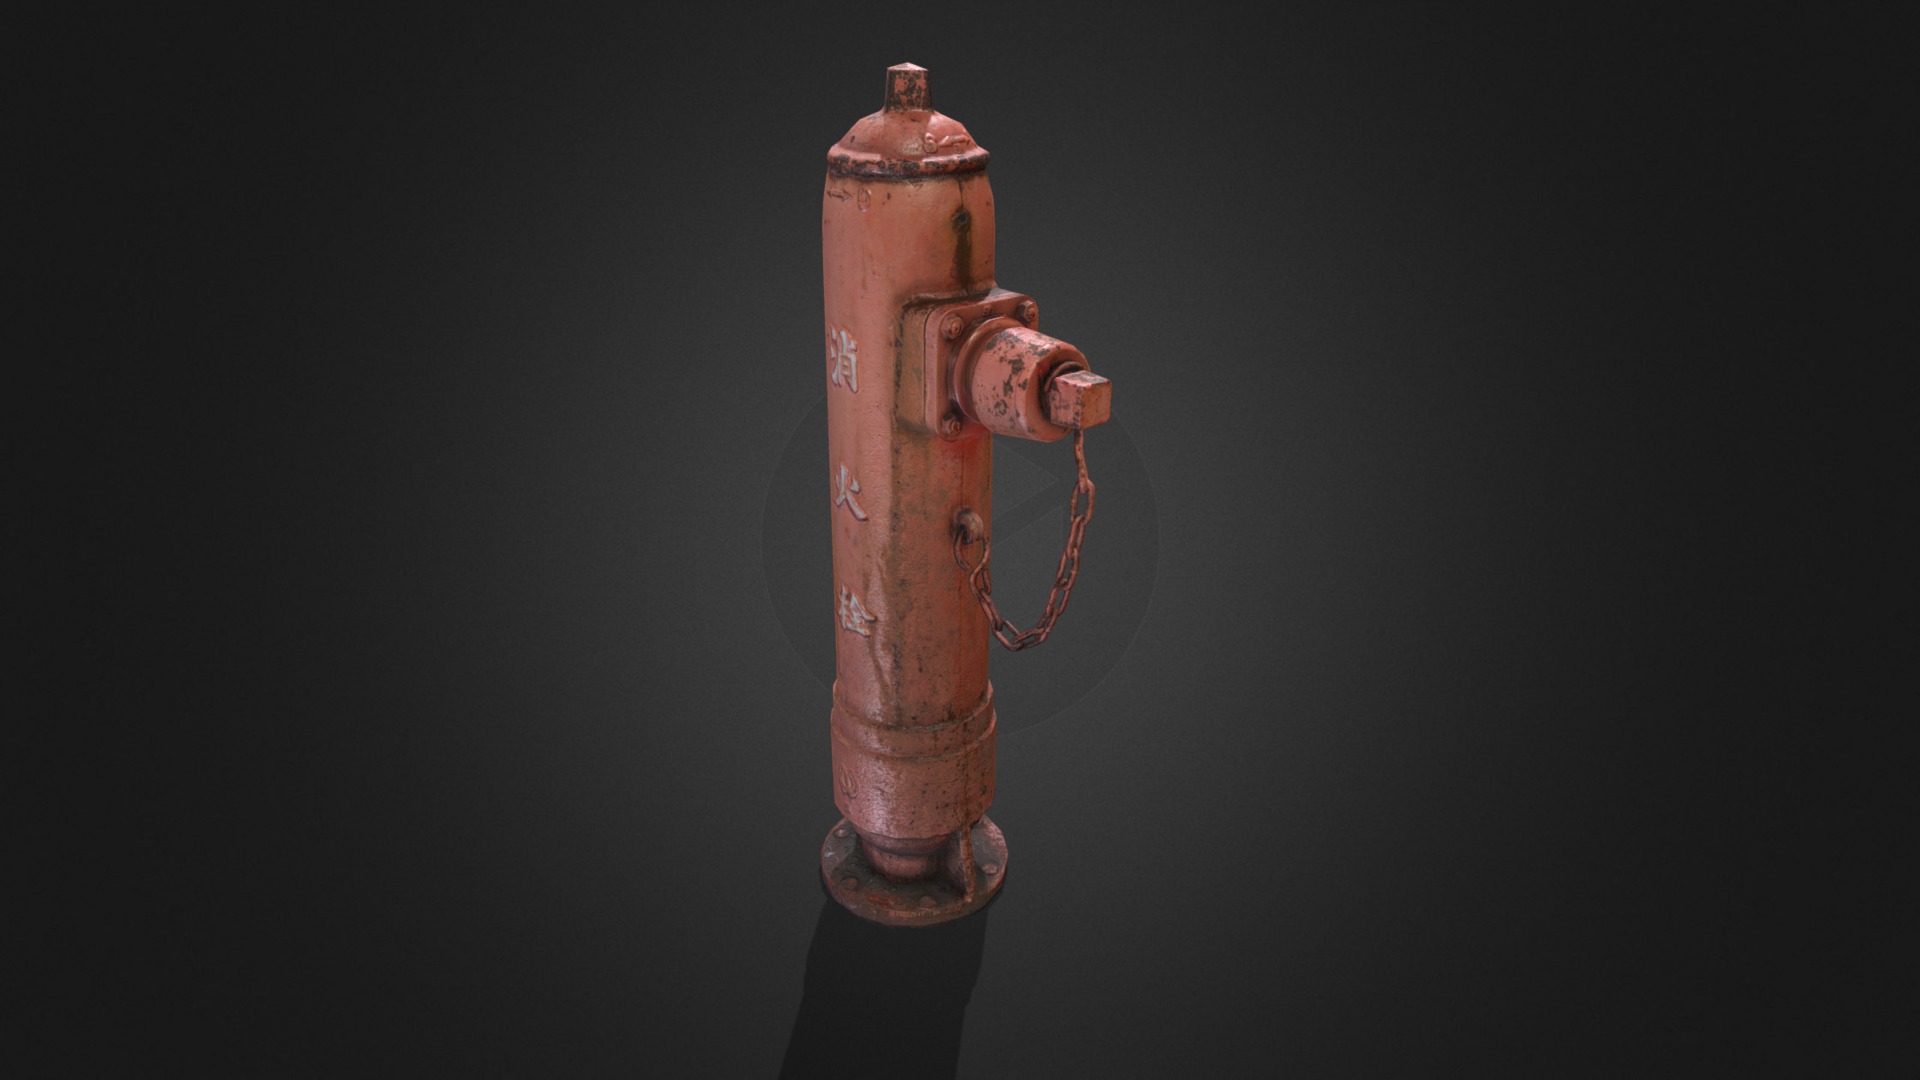 3D model Photogrammetry Japanese Fire Hydrant - This is a 3D model of the Photogrammetry Japanese Fire Hydrant. The 3D model is about a fire hydrant with a black background.